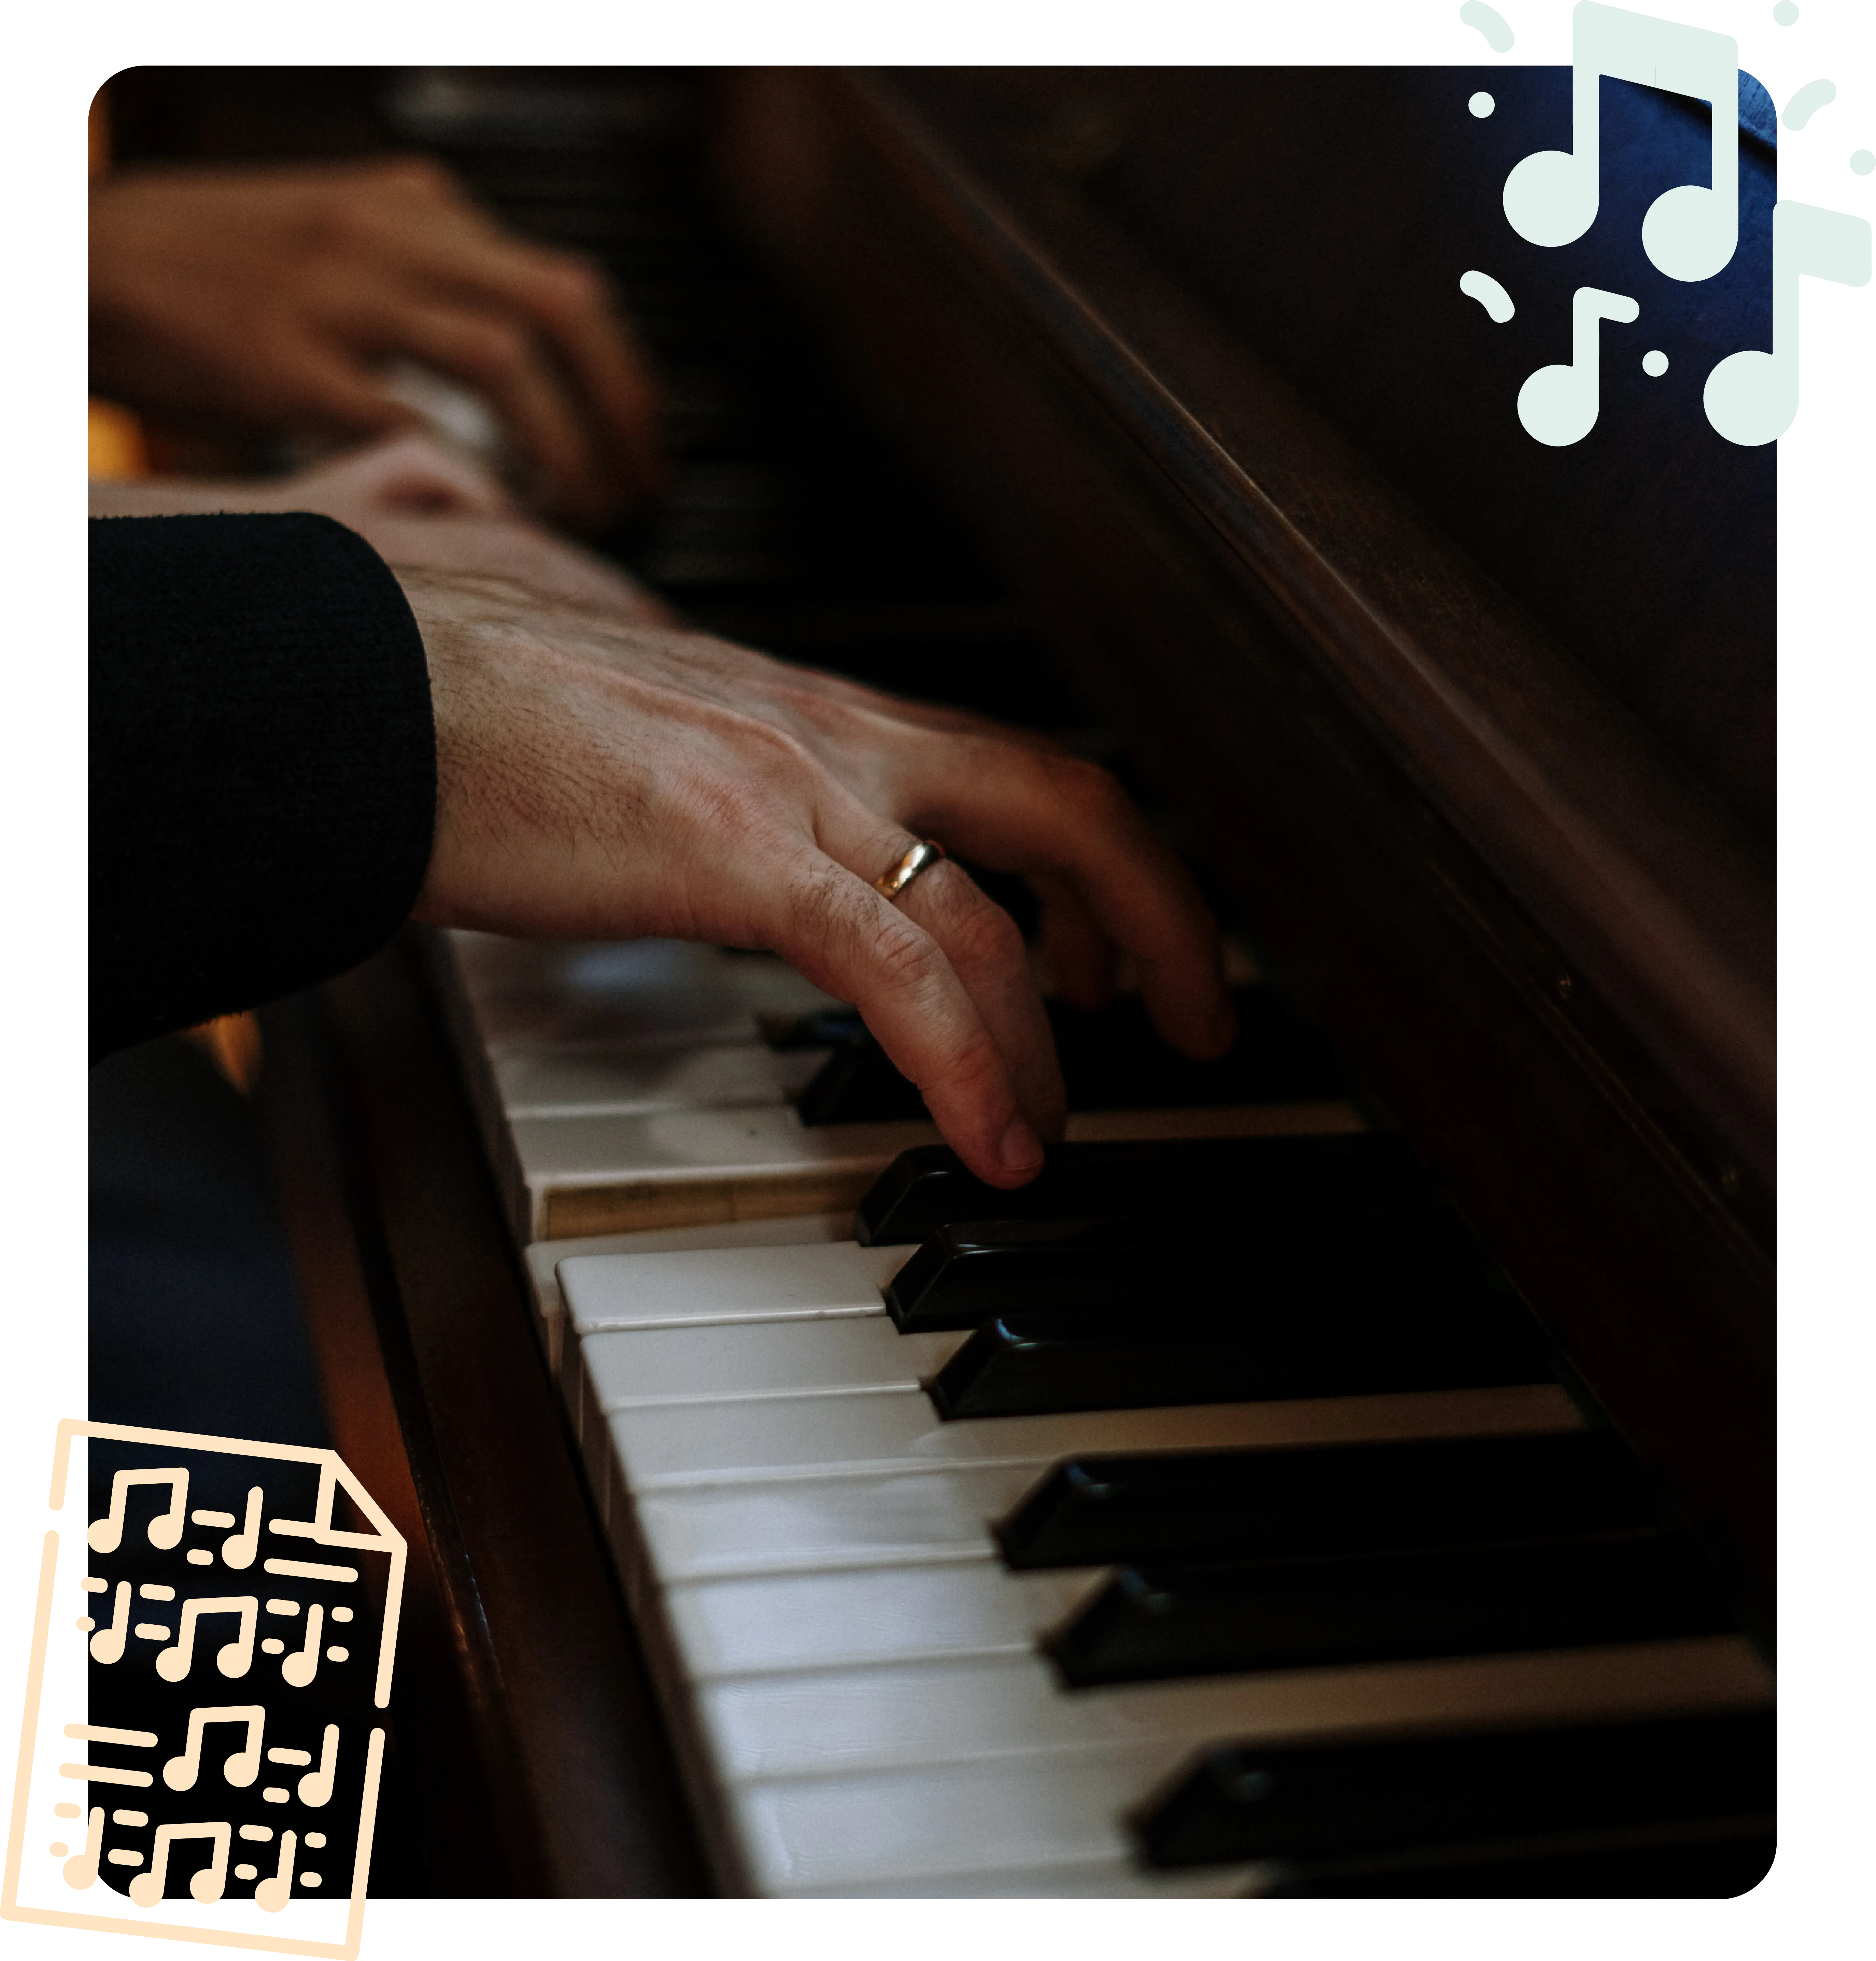 Hands at piano featured image